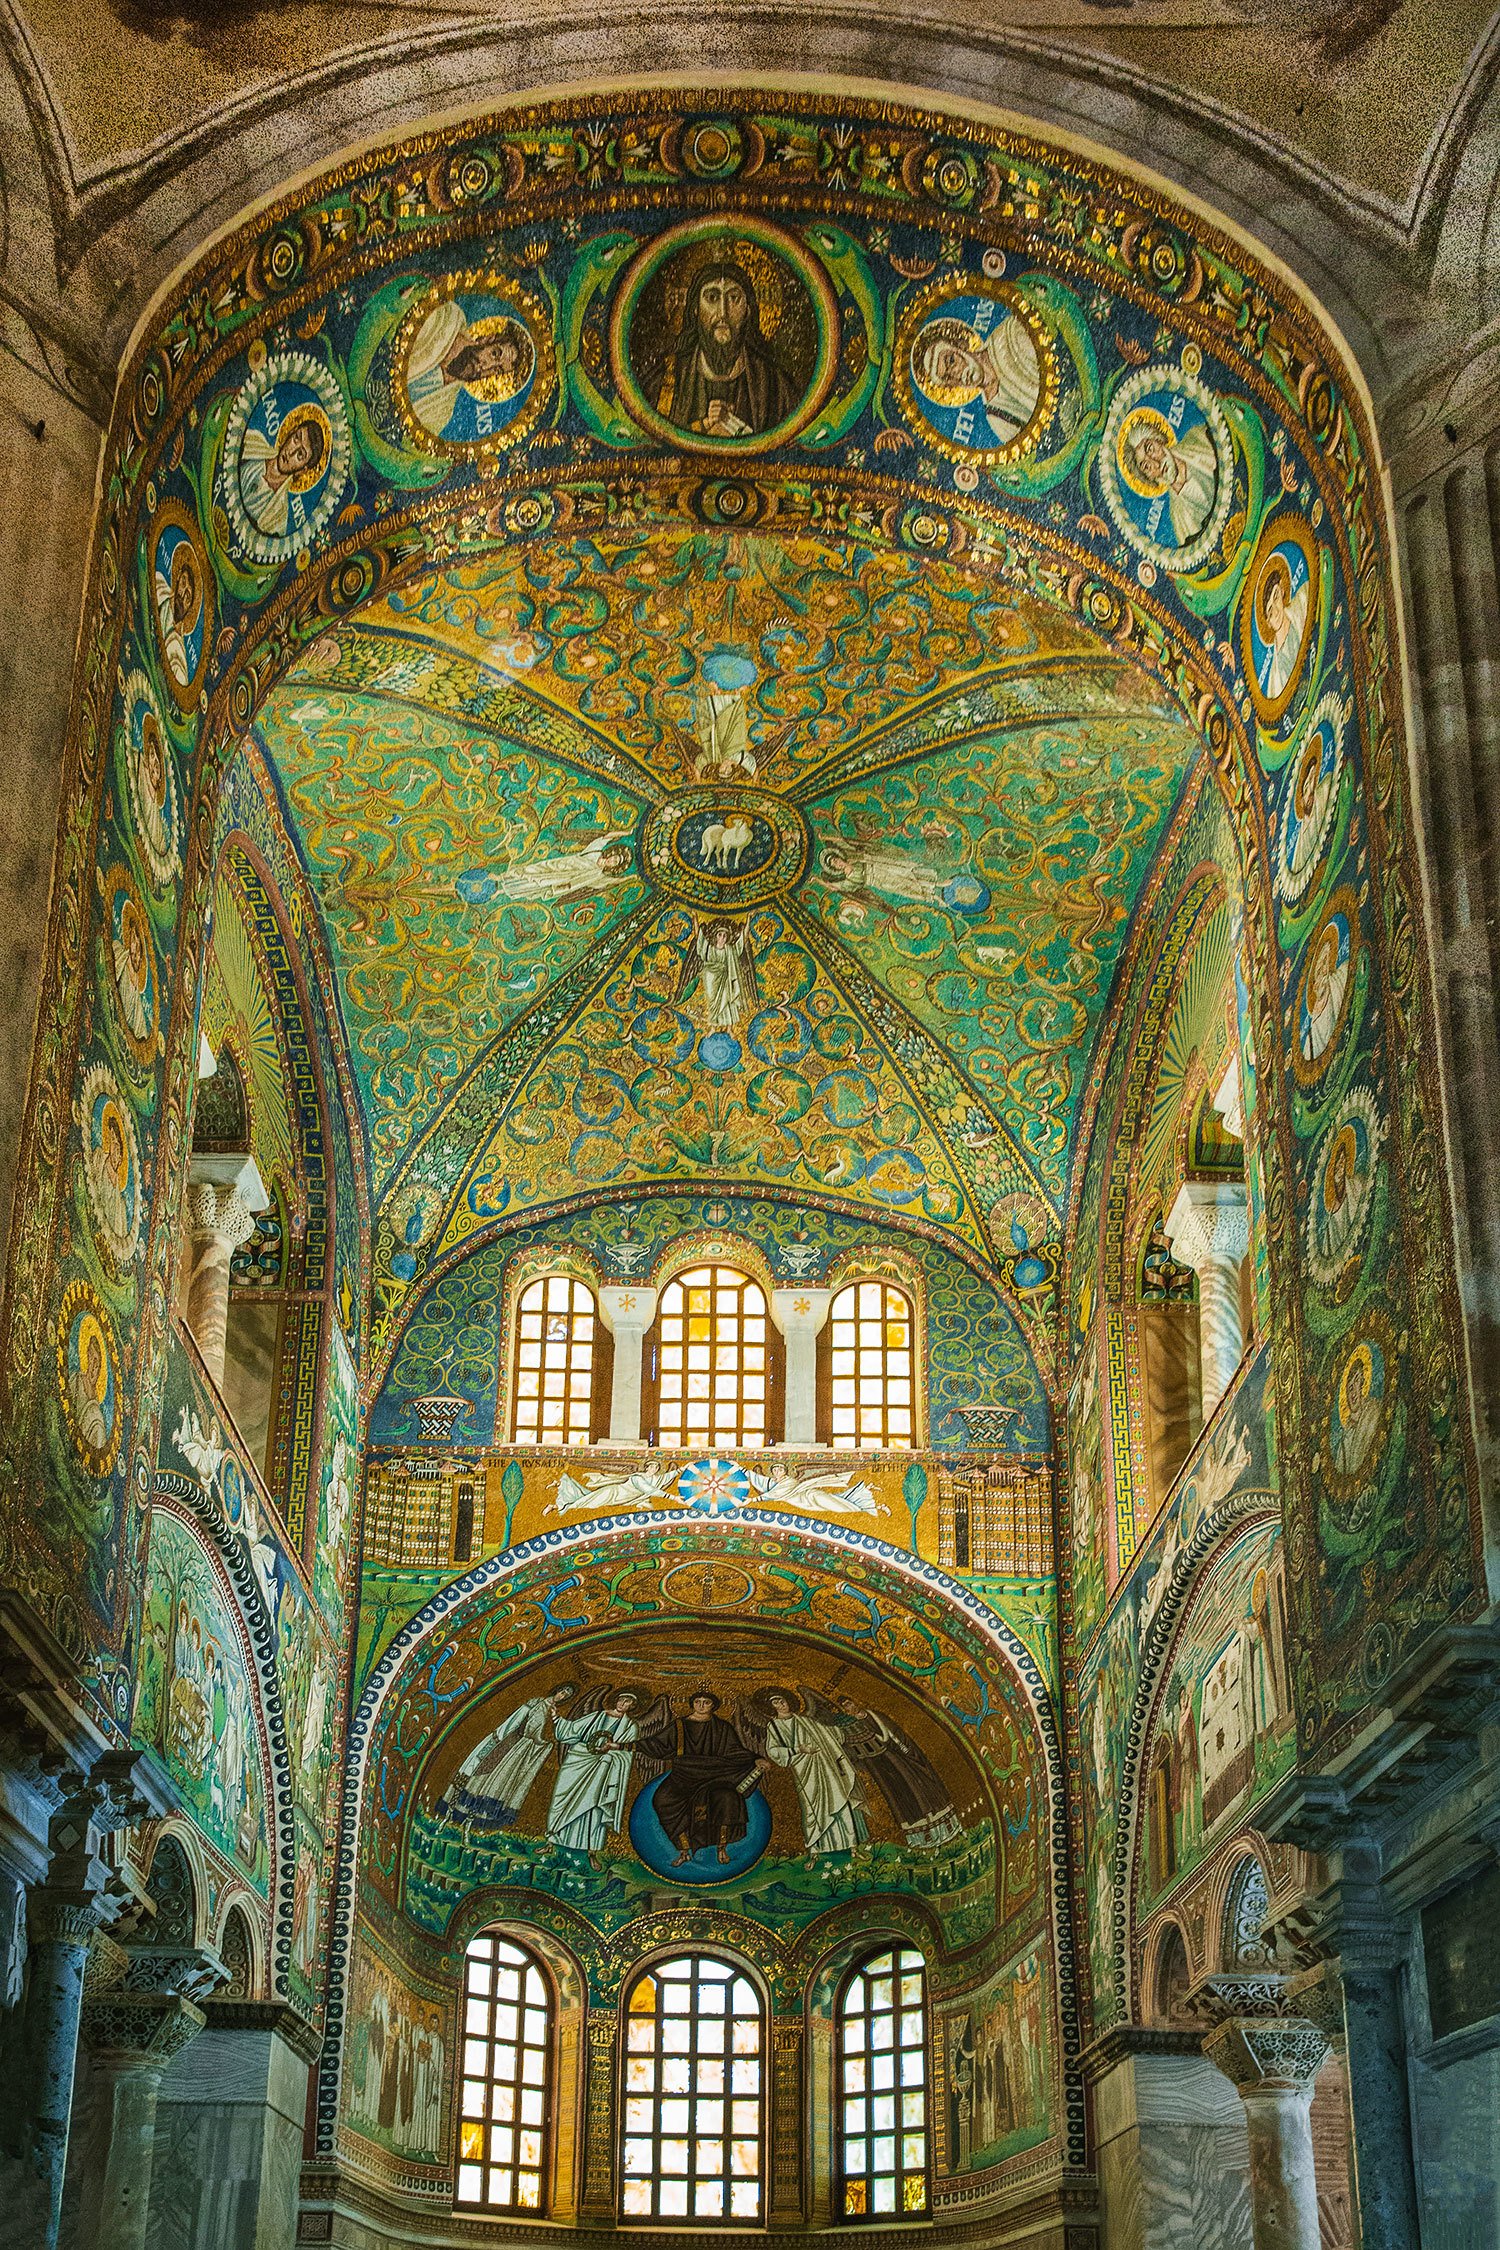 Mosaics & Mausoleums: 7 of the Best Things to Do in ...
